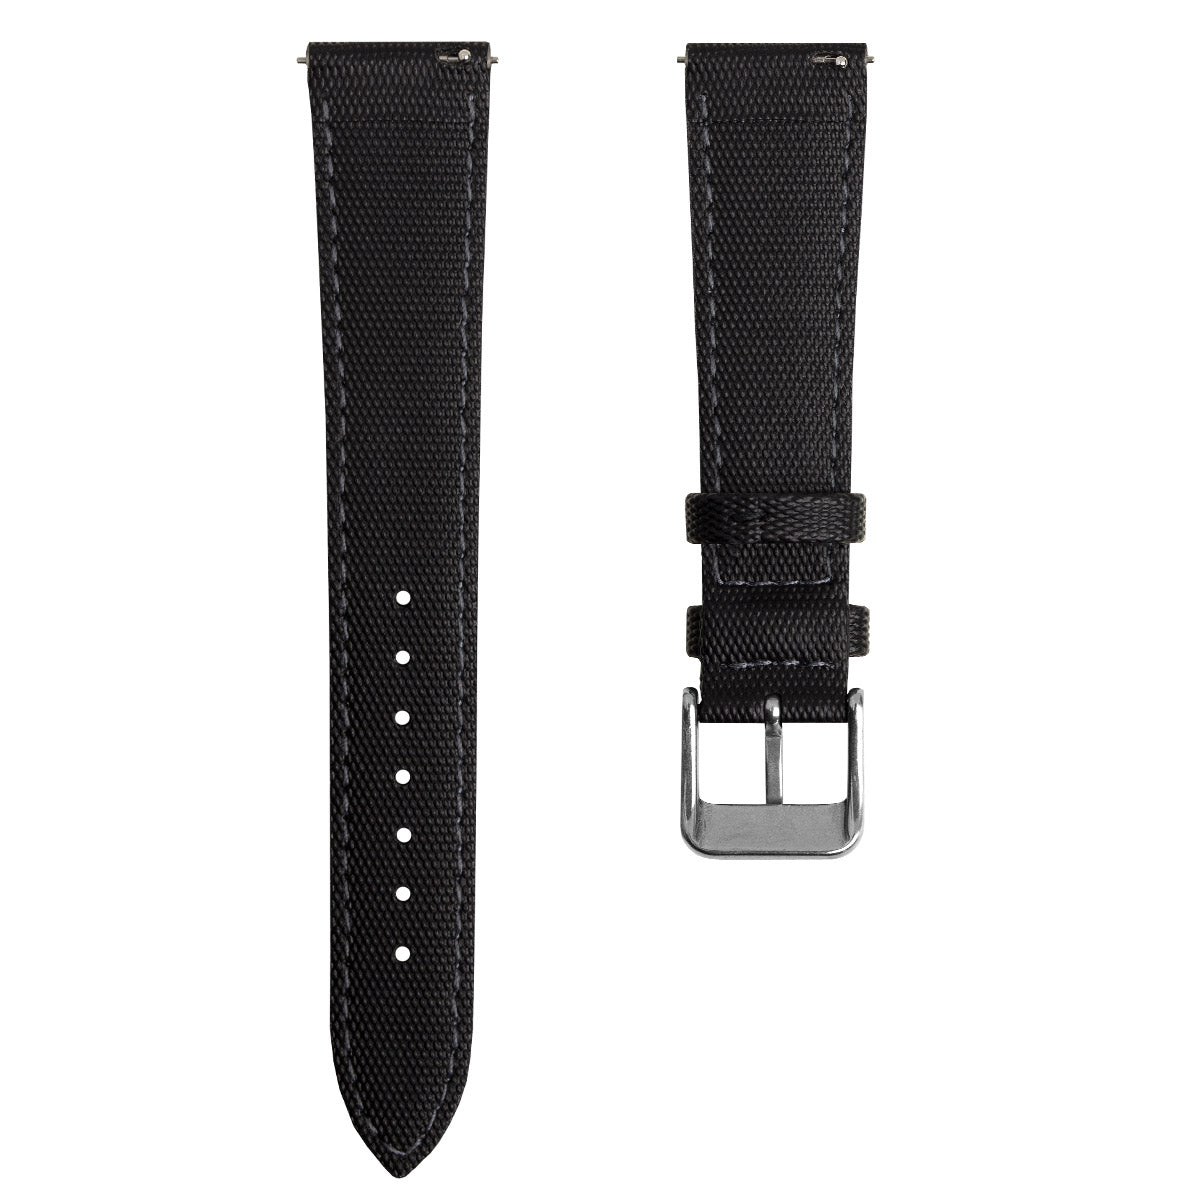 ZULUDIVER Quick Release Sailcloth Padded Divers Watch Strap